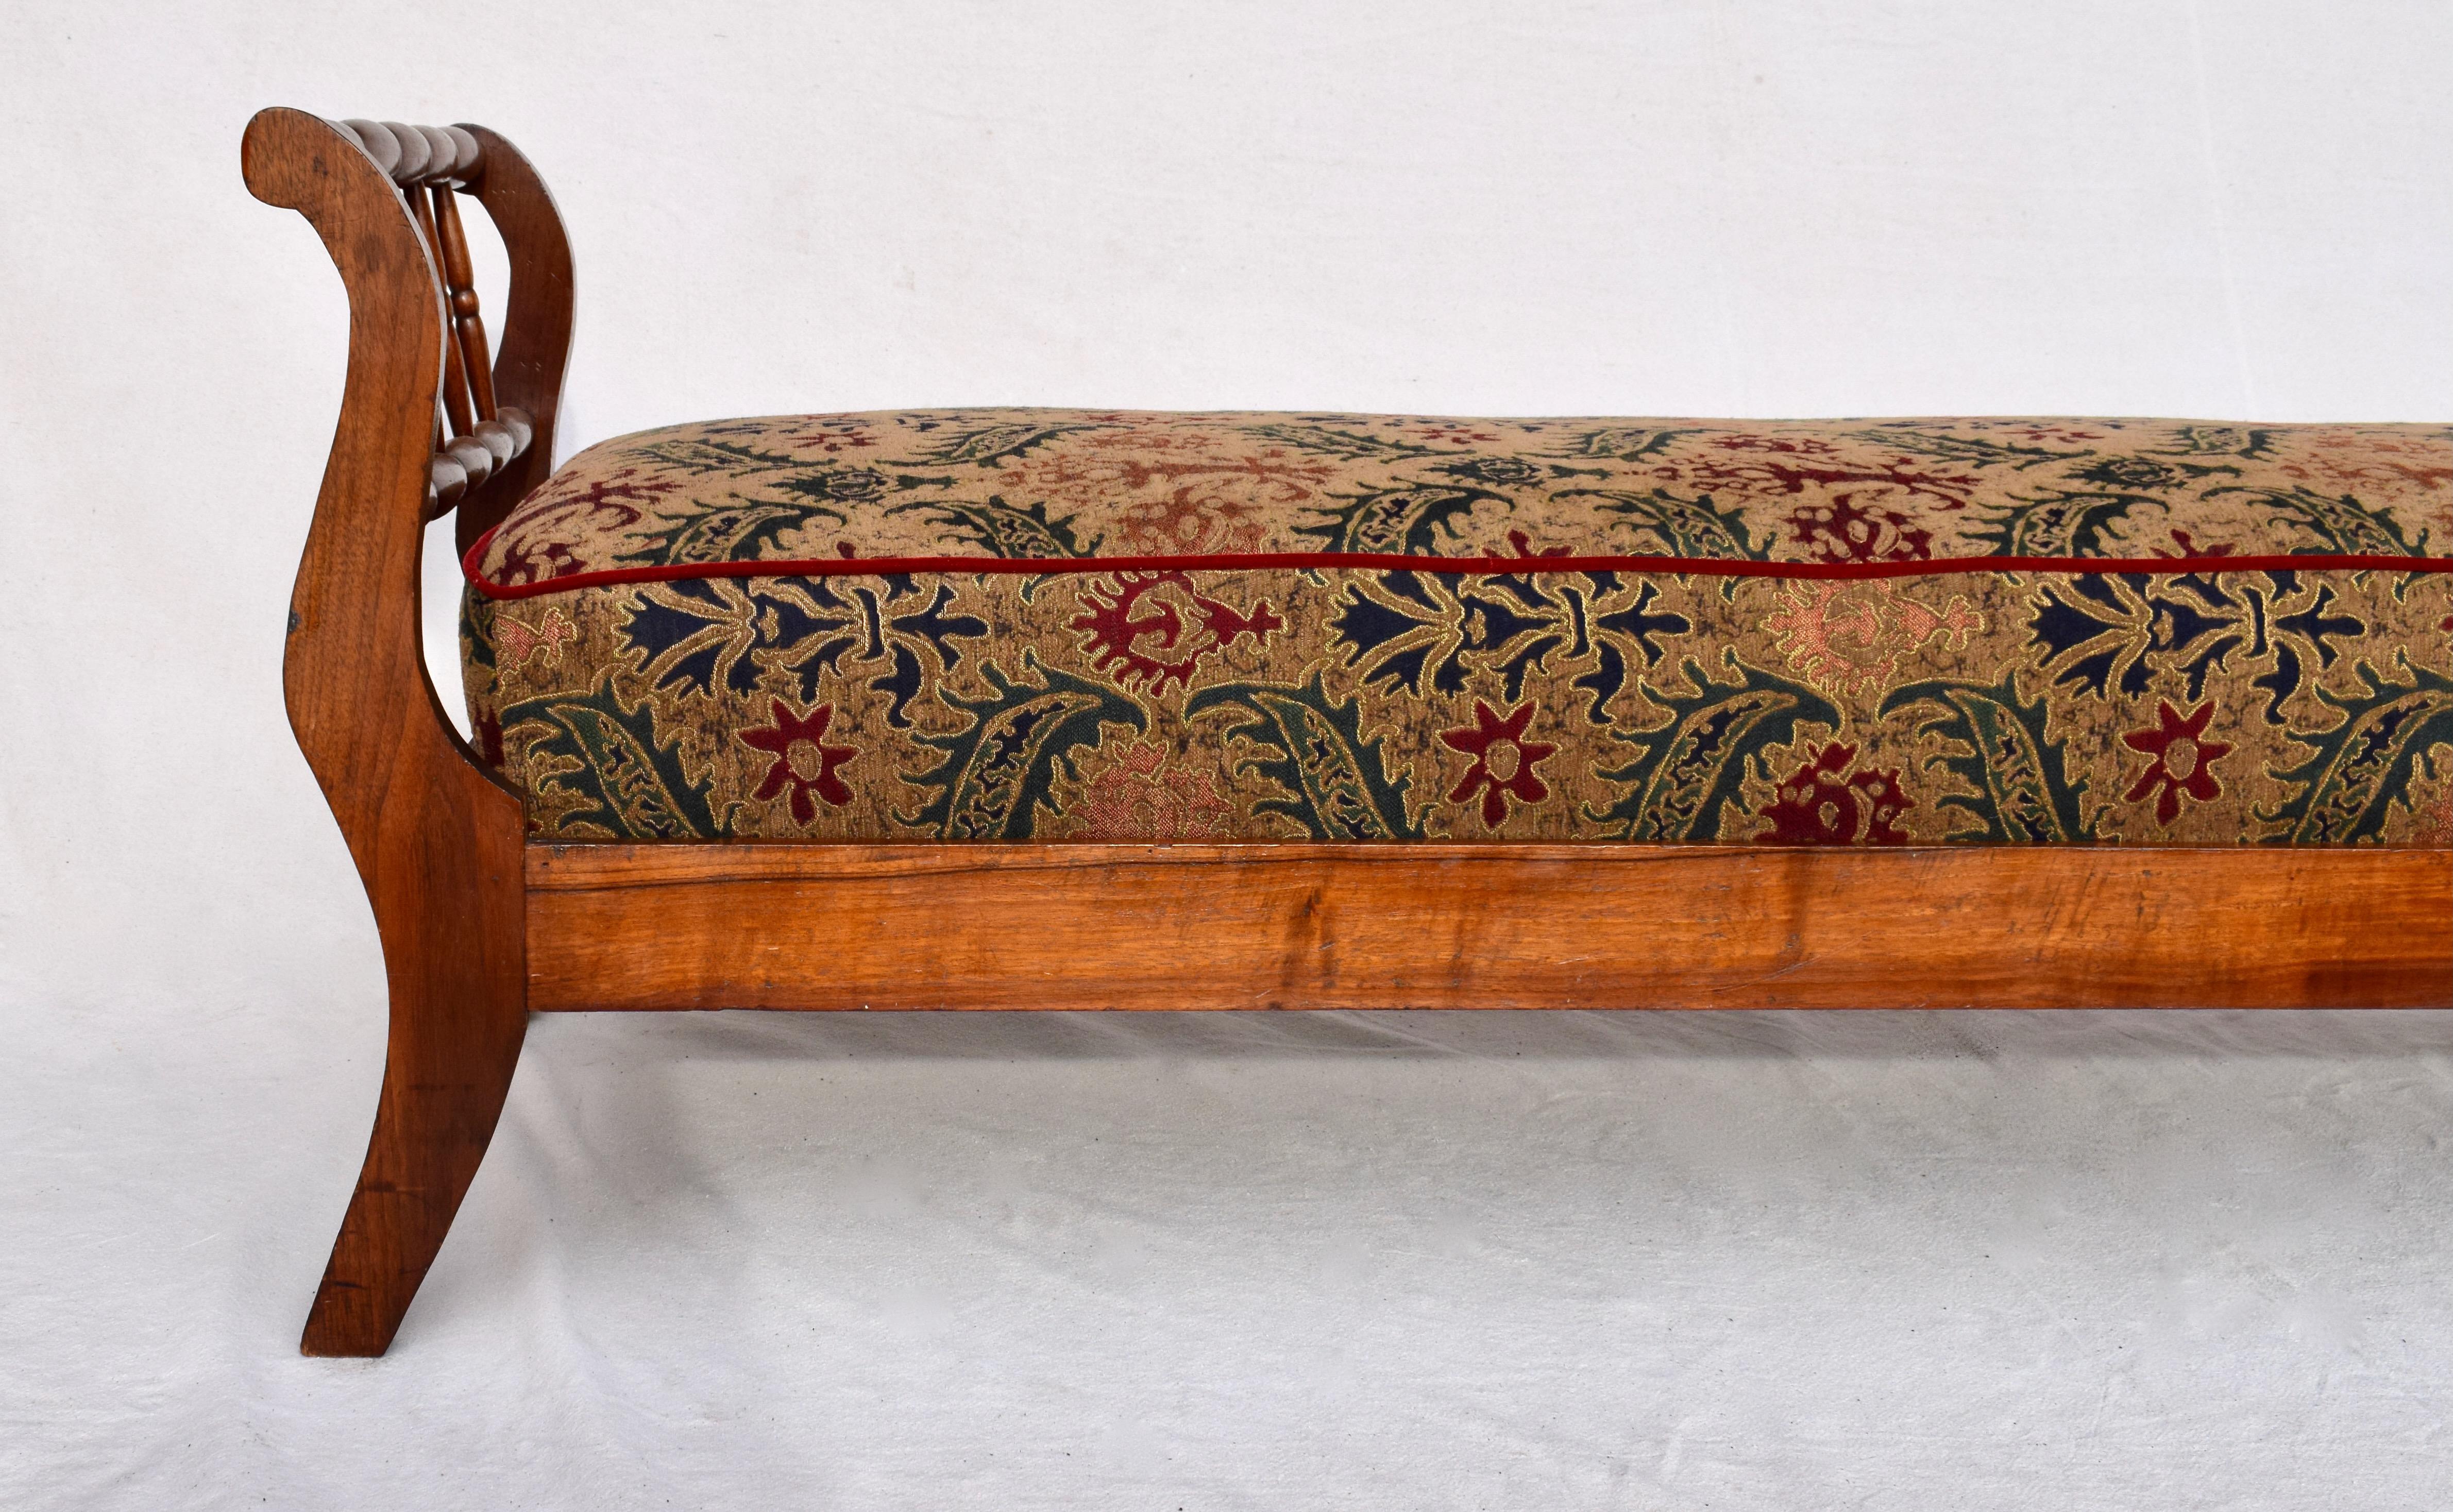 19th century Country Regency Mahogany daybed consisting of clever four piece frame having hand turnings & curvaceous scroll arms terminating on delightfully splayed legs with removable side rails. The removable spring constructed cushion is newly